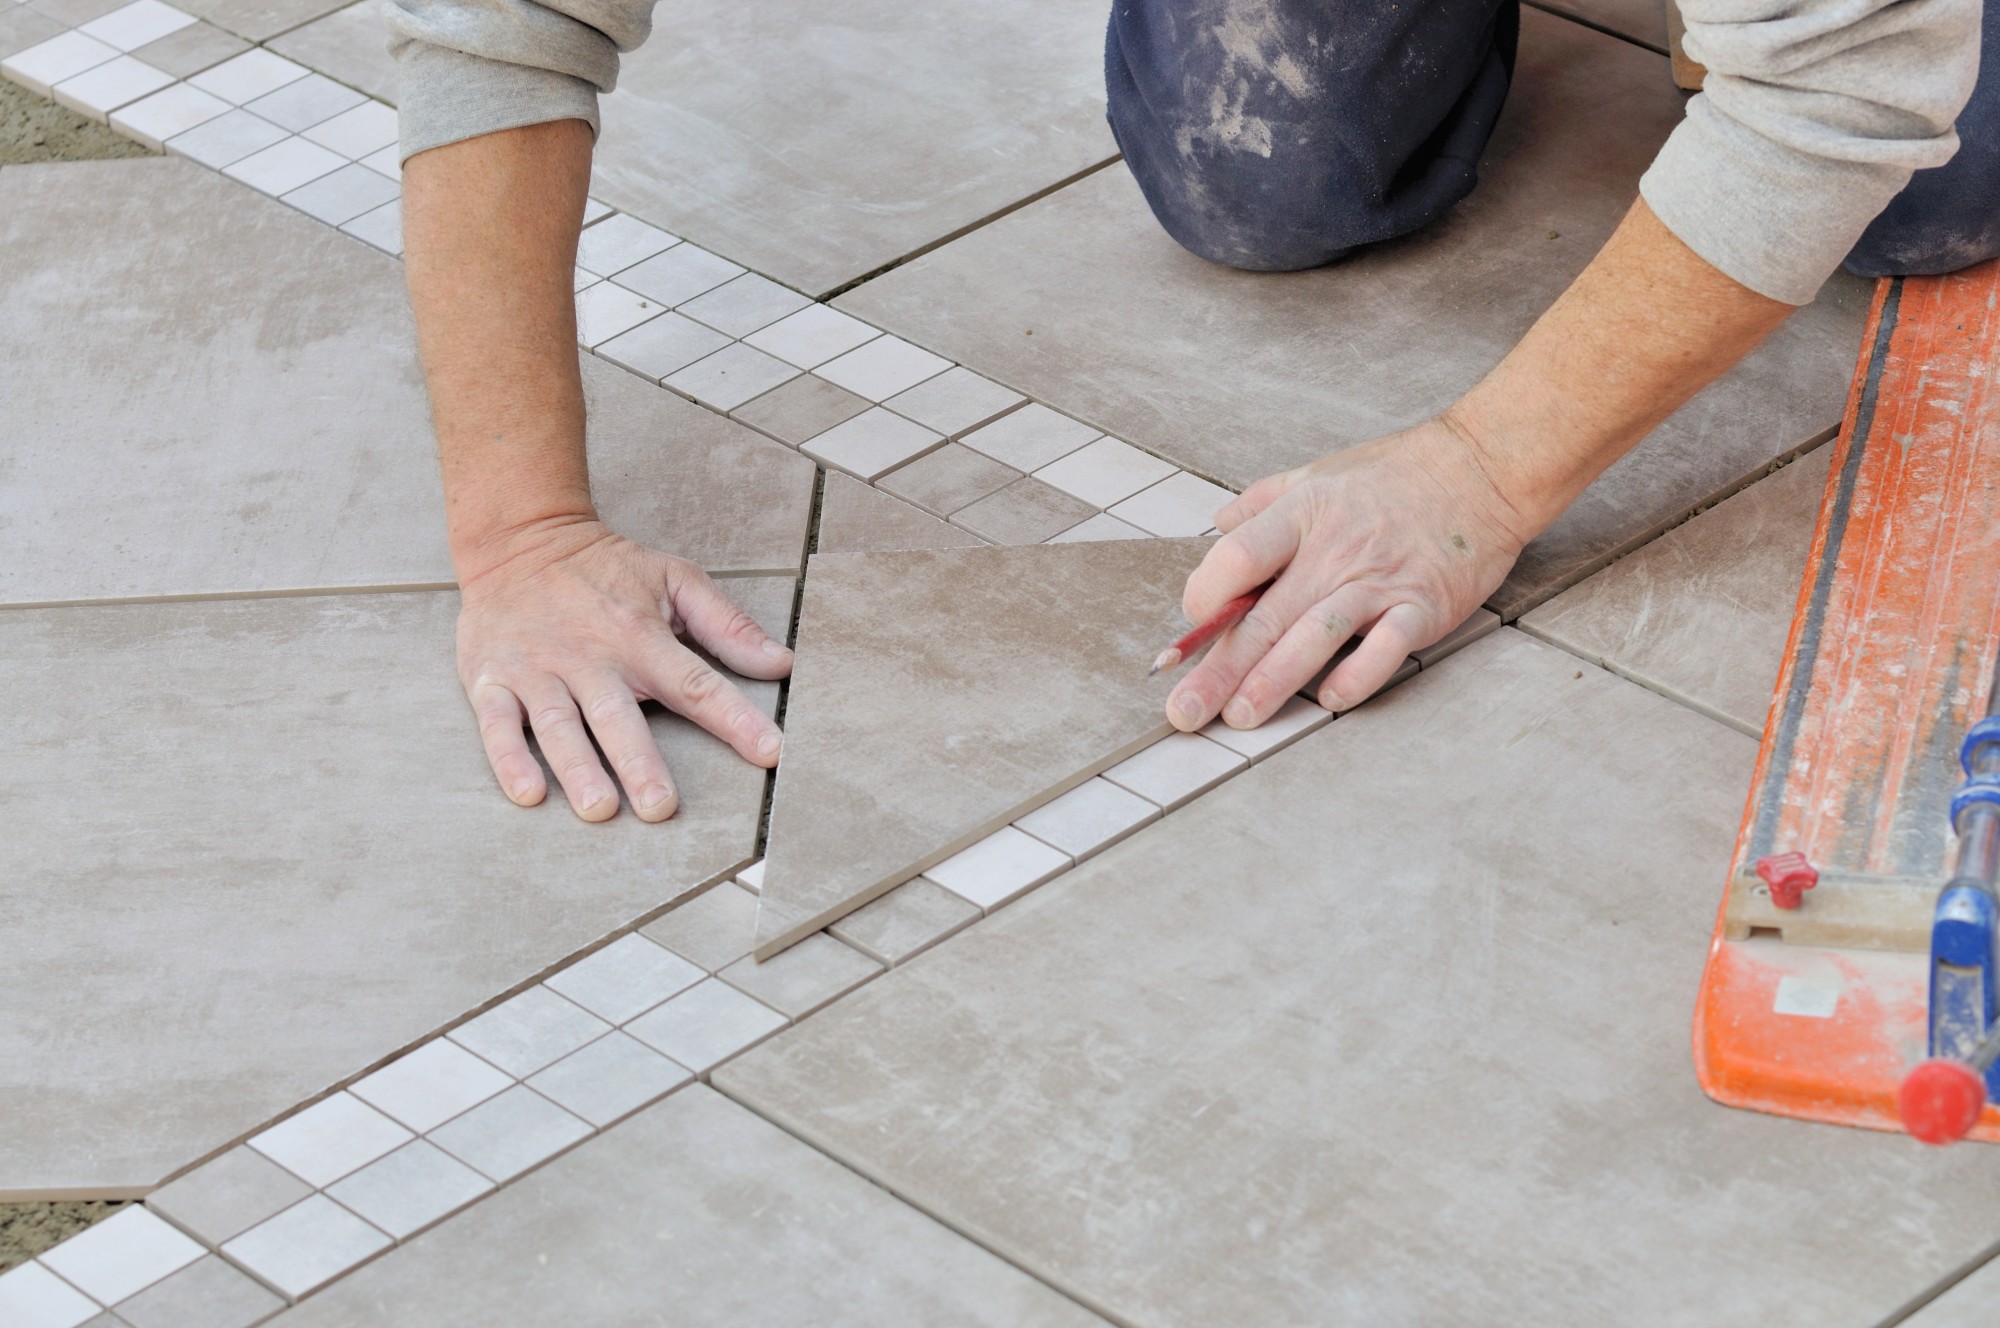 Does Vinegar Damage Porcelain Tile You, How To Remove Water Stains From Porcelain Floor Tiles